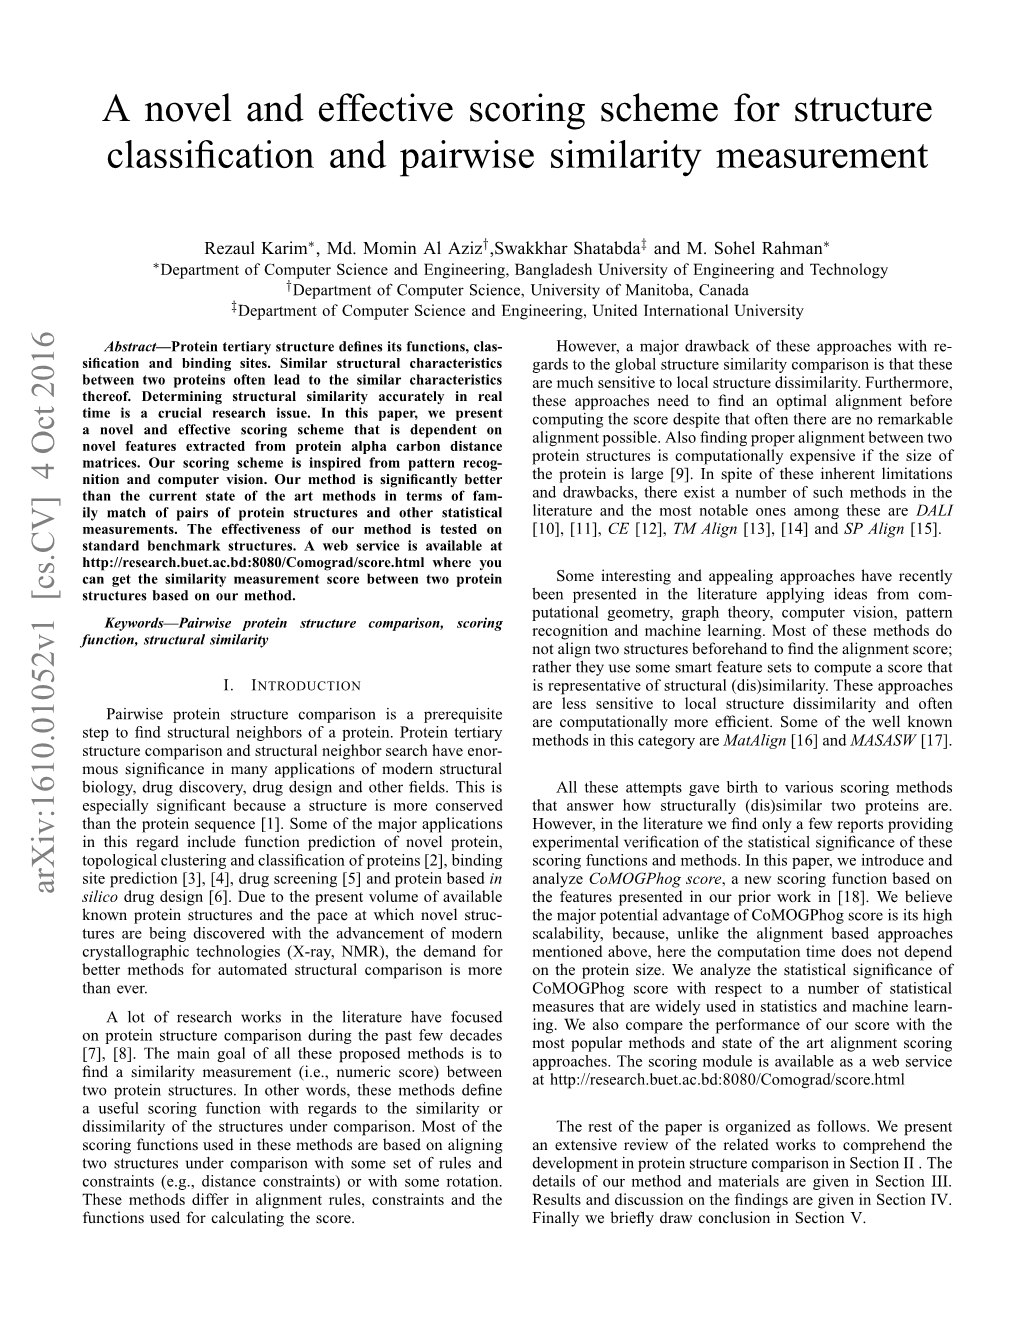 A Novel and Effective Scoring Scheme for Structure Classification And